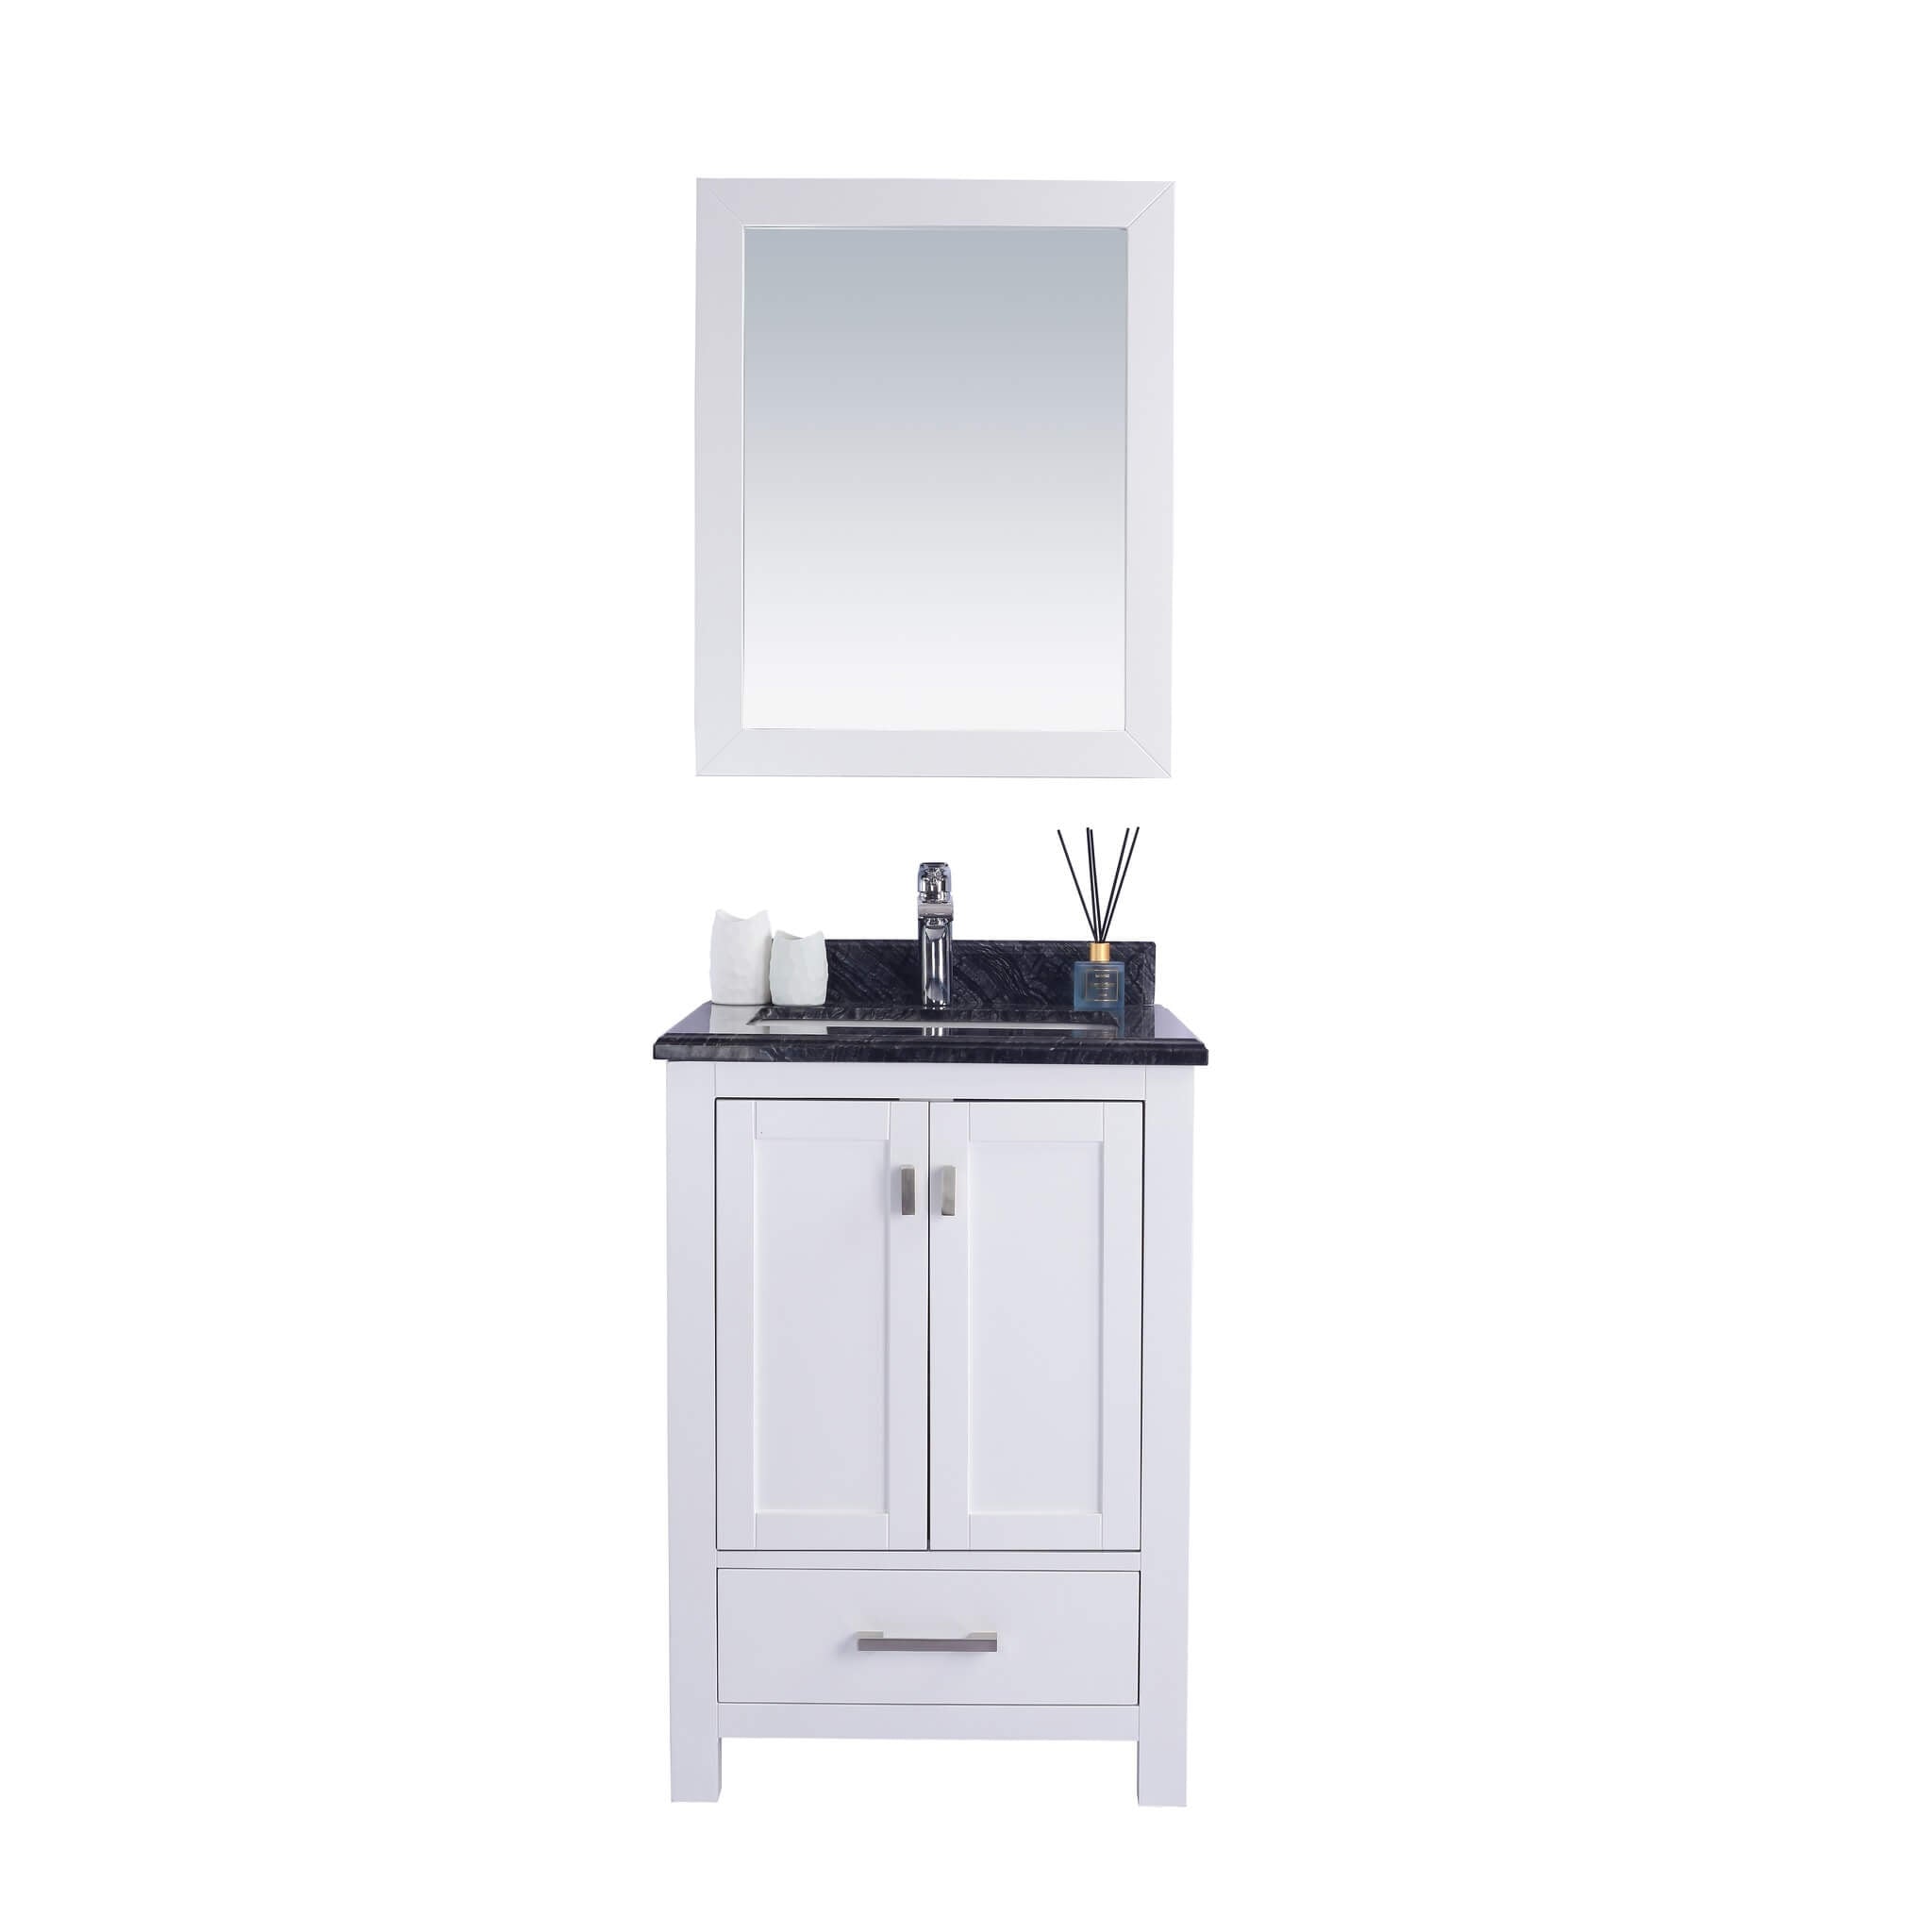 LAVIVA Wilson 313ANG-24W-BW 24" Single Bathroom Vanity in White with Black Wood Marble, White Rectangle Sink, Front View